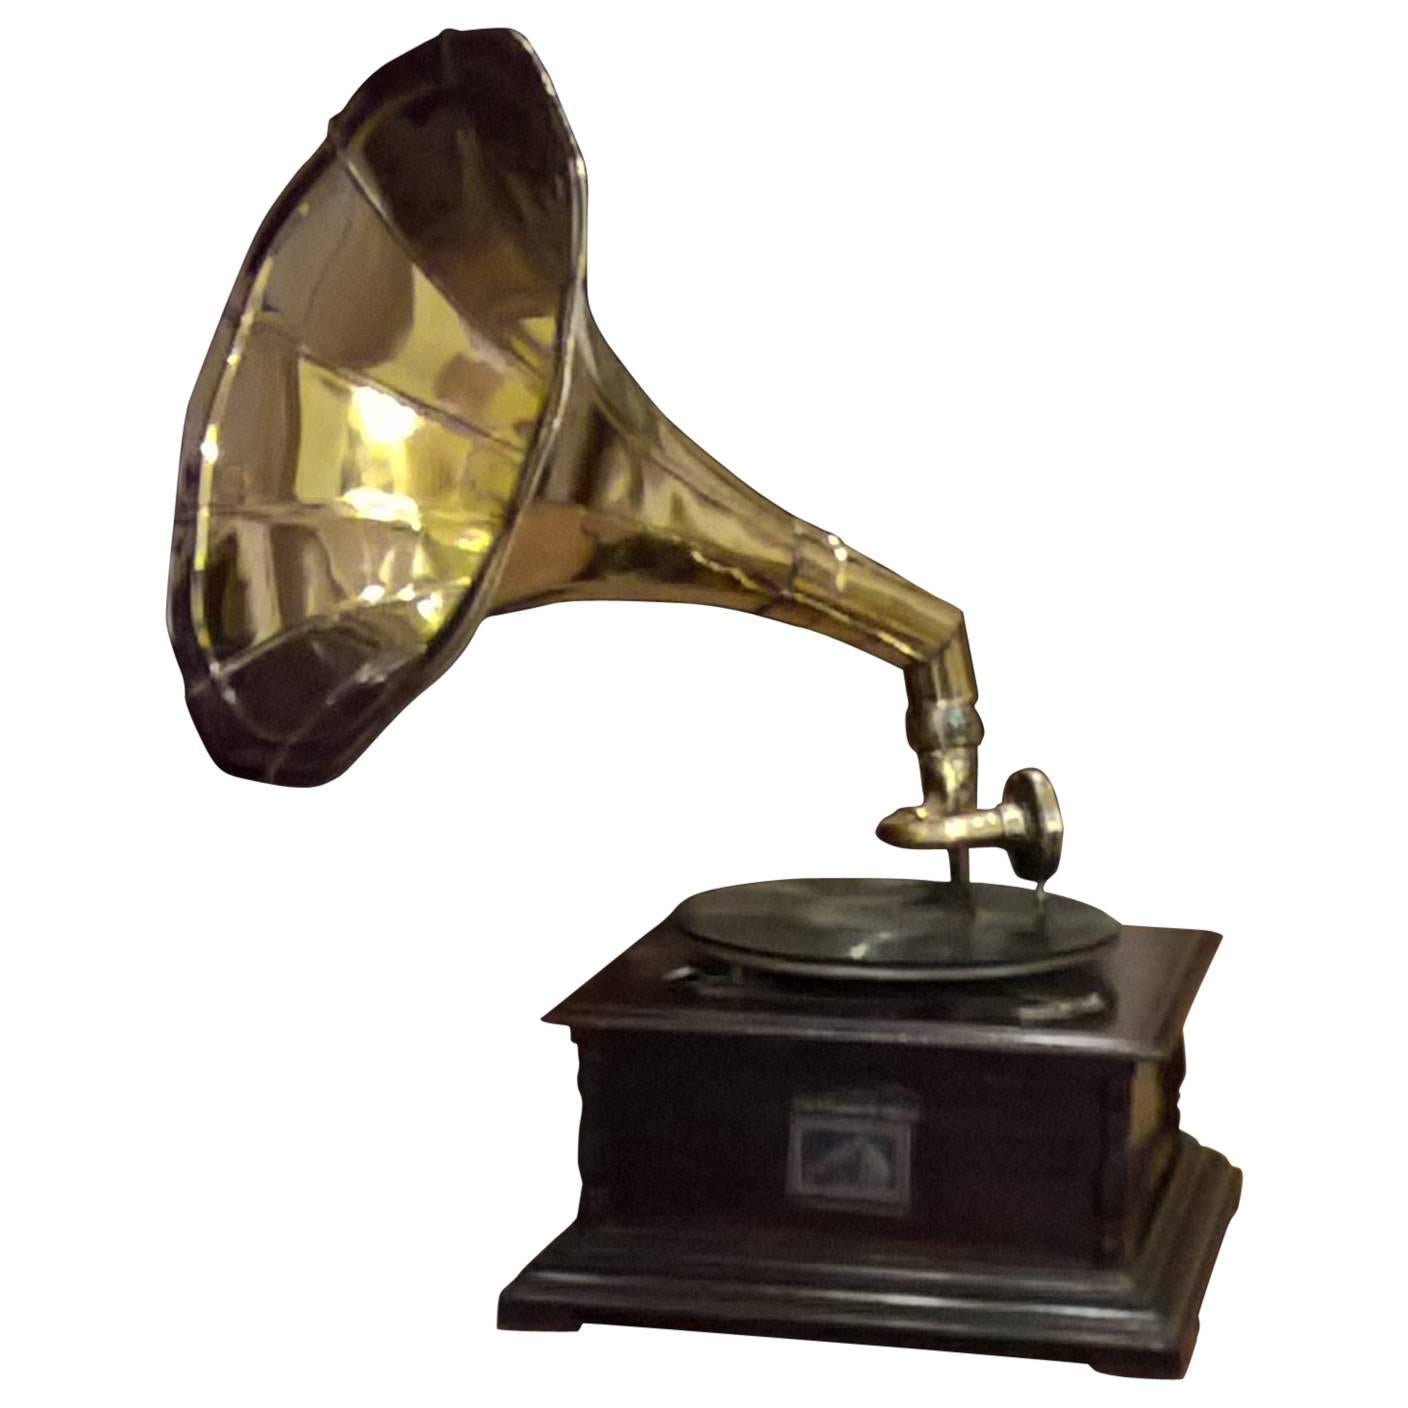 "His Master's Voice" Wind Up Gramophone